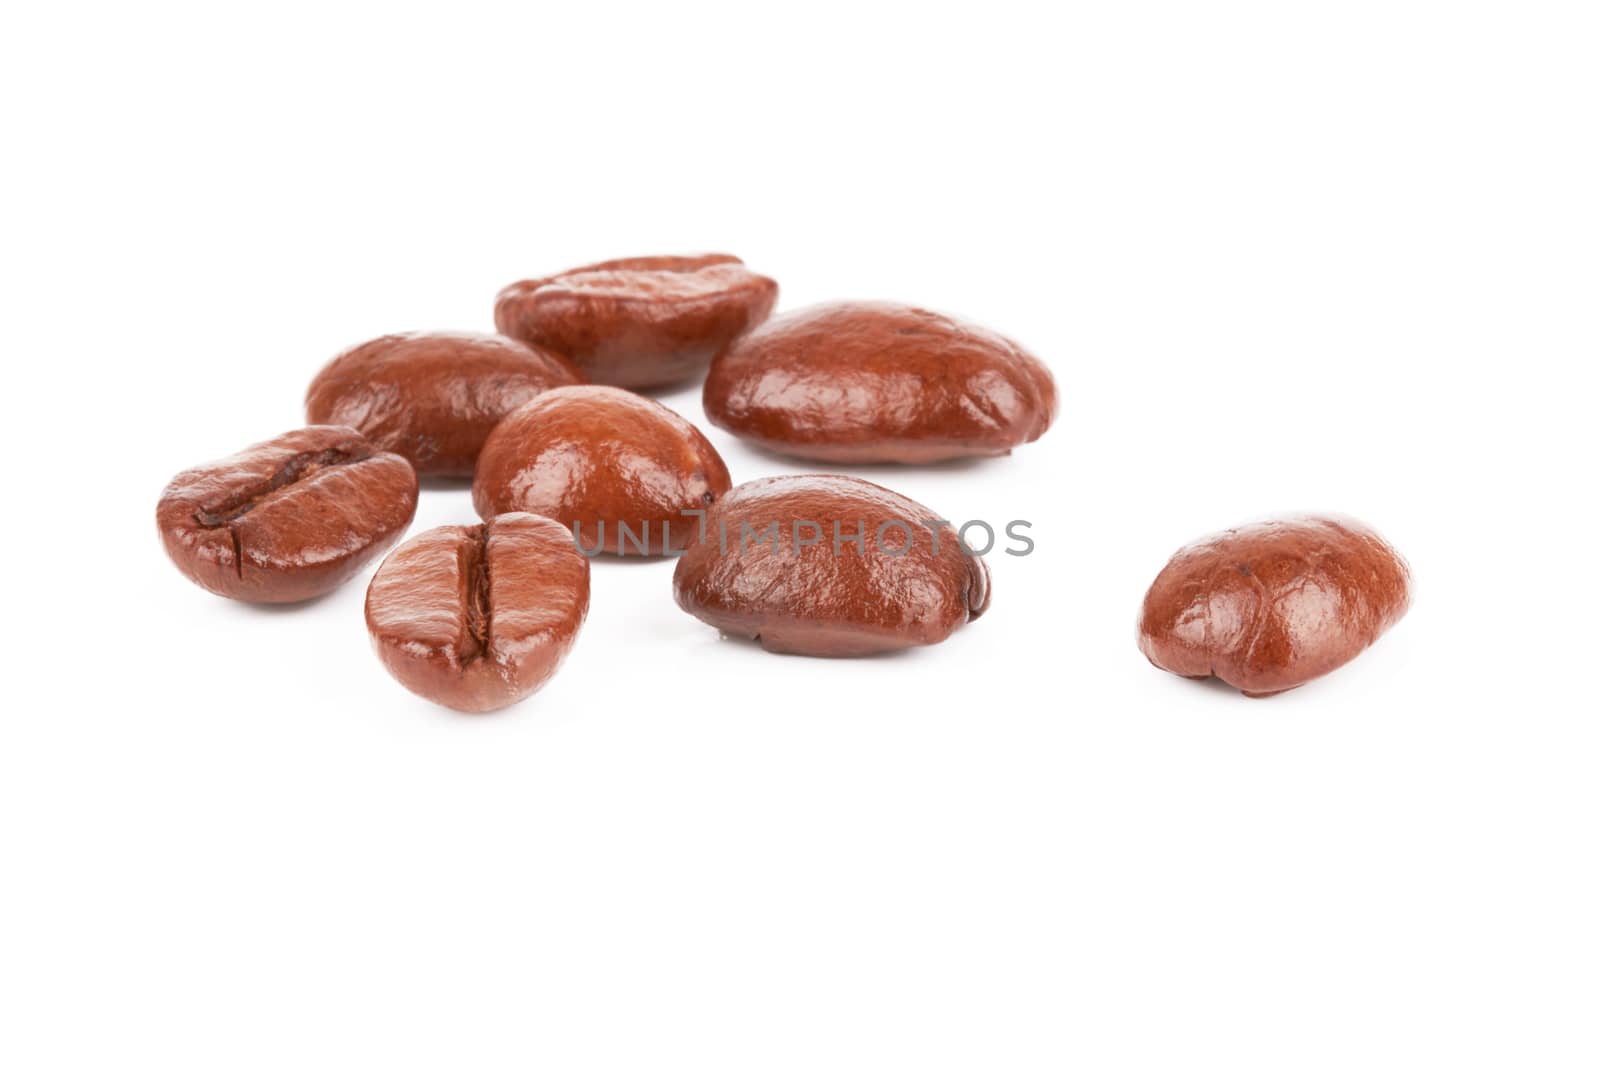 Brown coffee beans on a white background